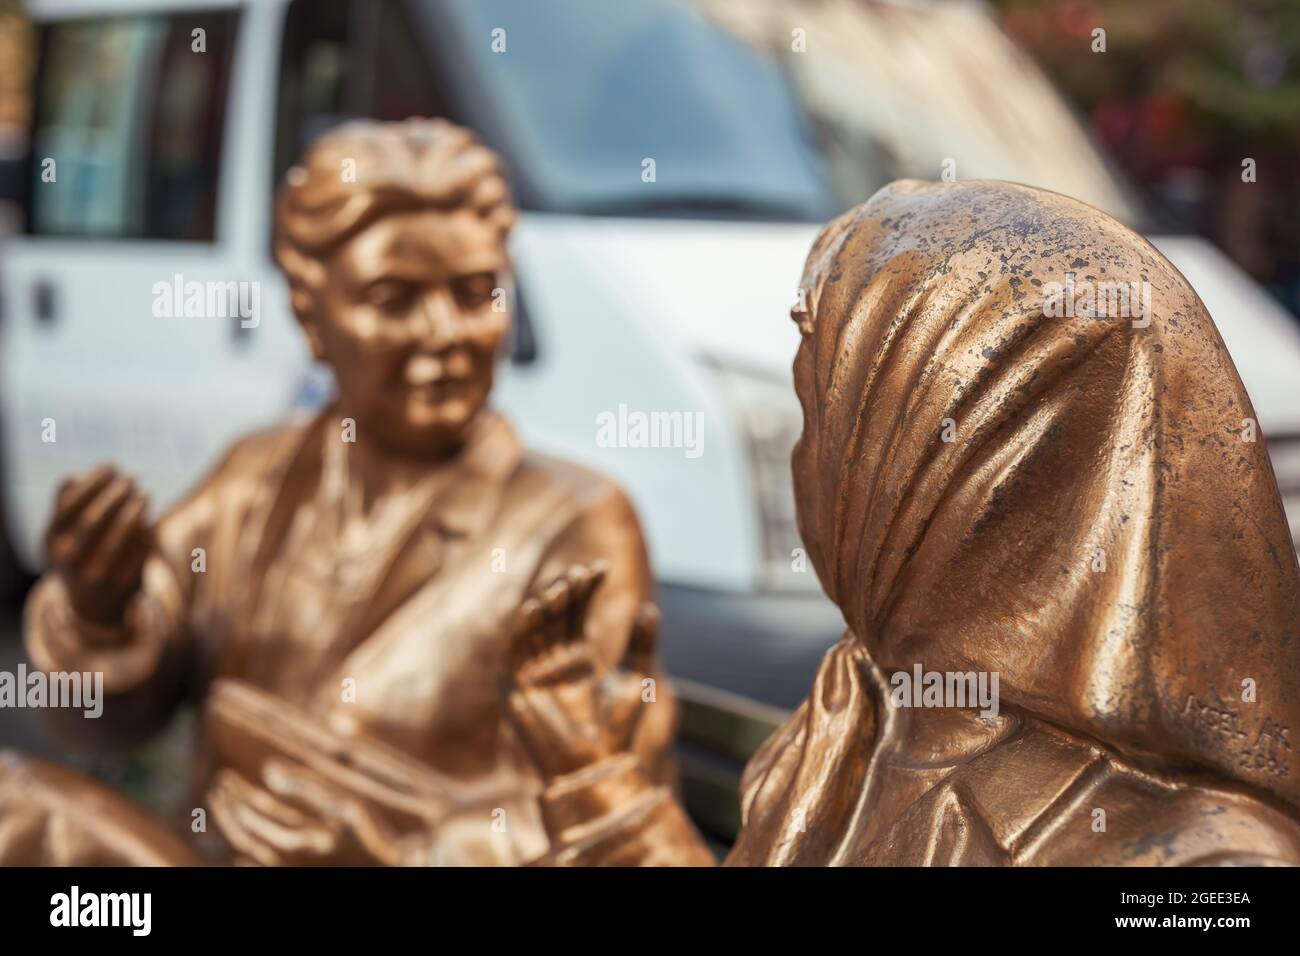 Detail of the statue of two women having a chat while stting on bench in Eskisehir, Turkey. Stock Photo